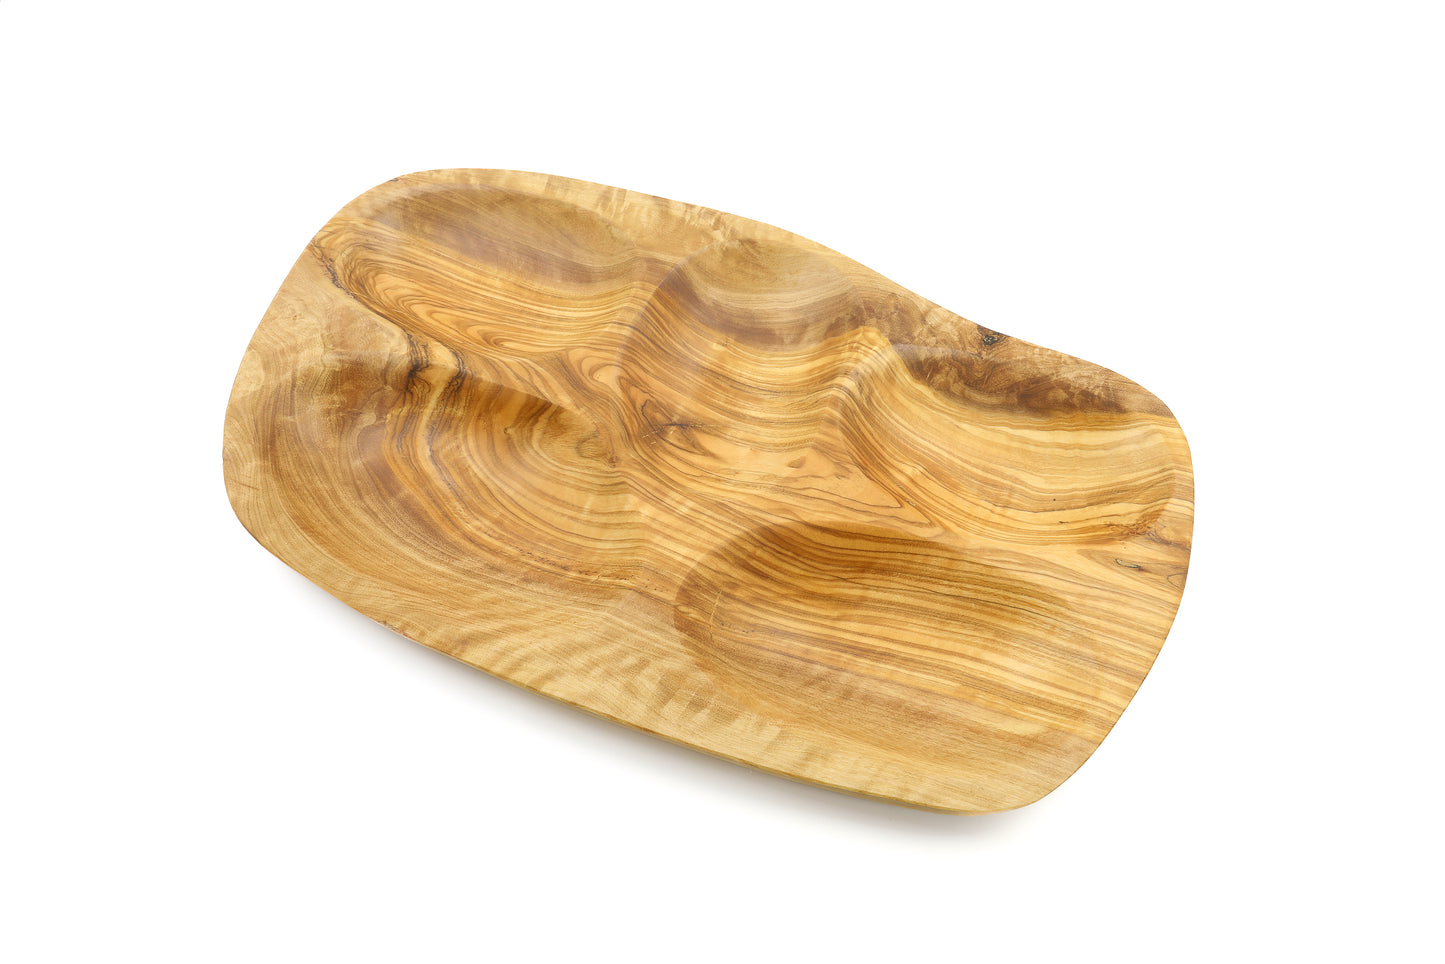 Durable and stylish olive wood sectional tray for serving appetizers